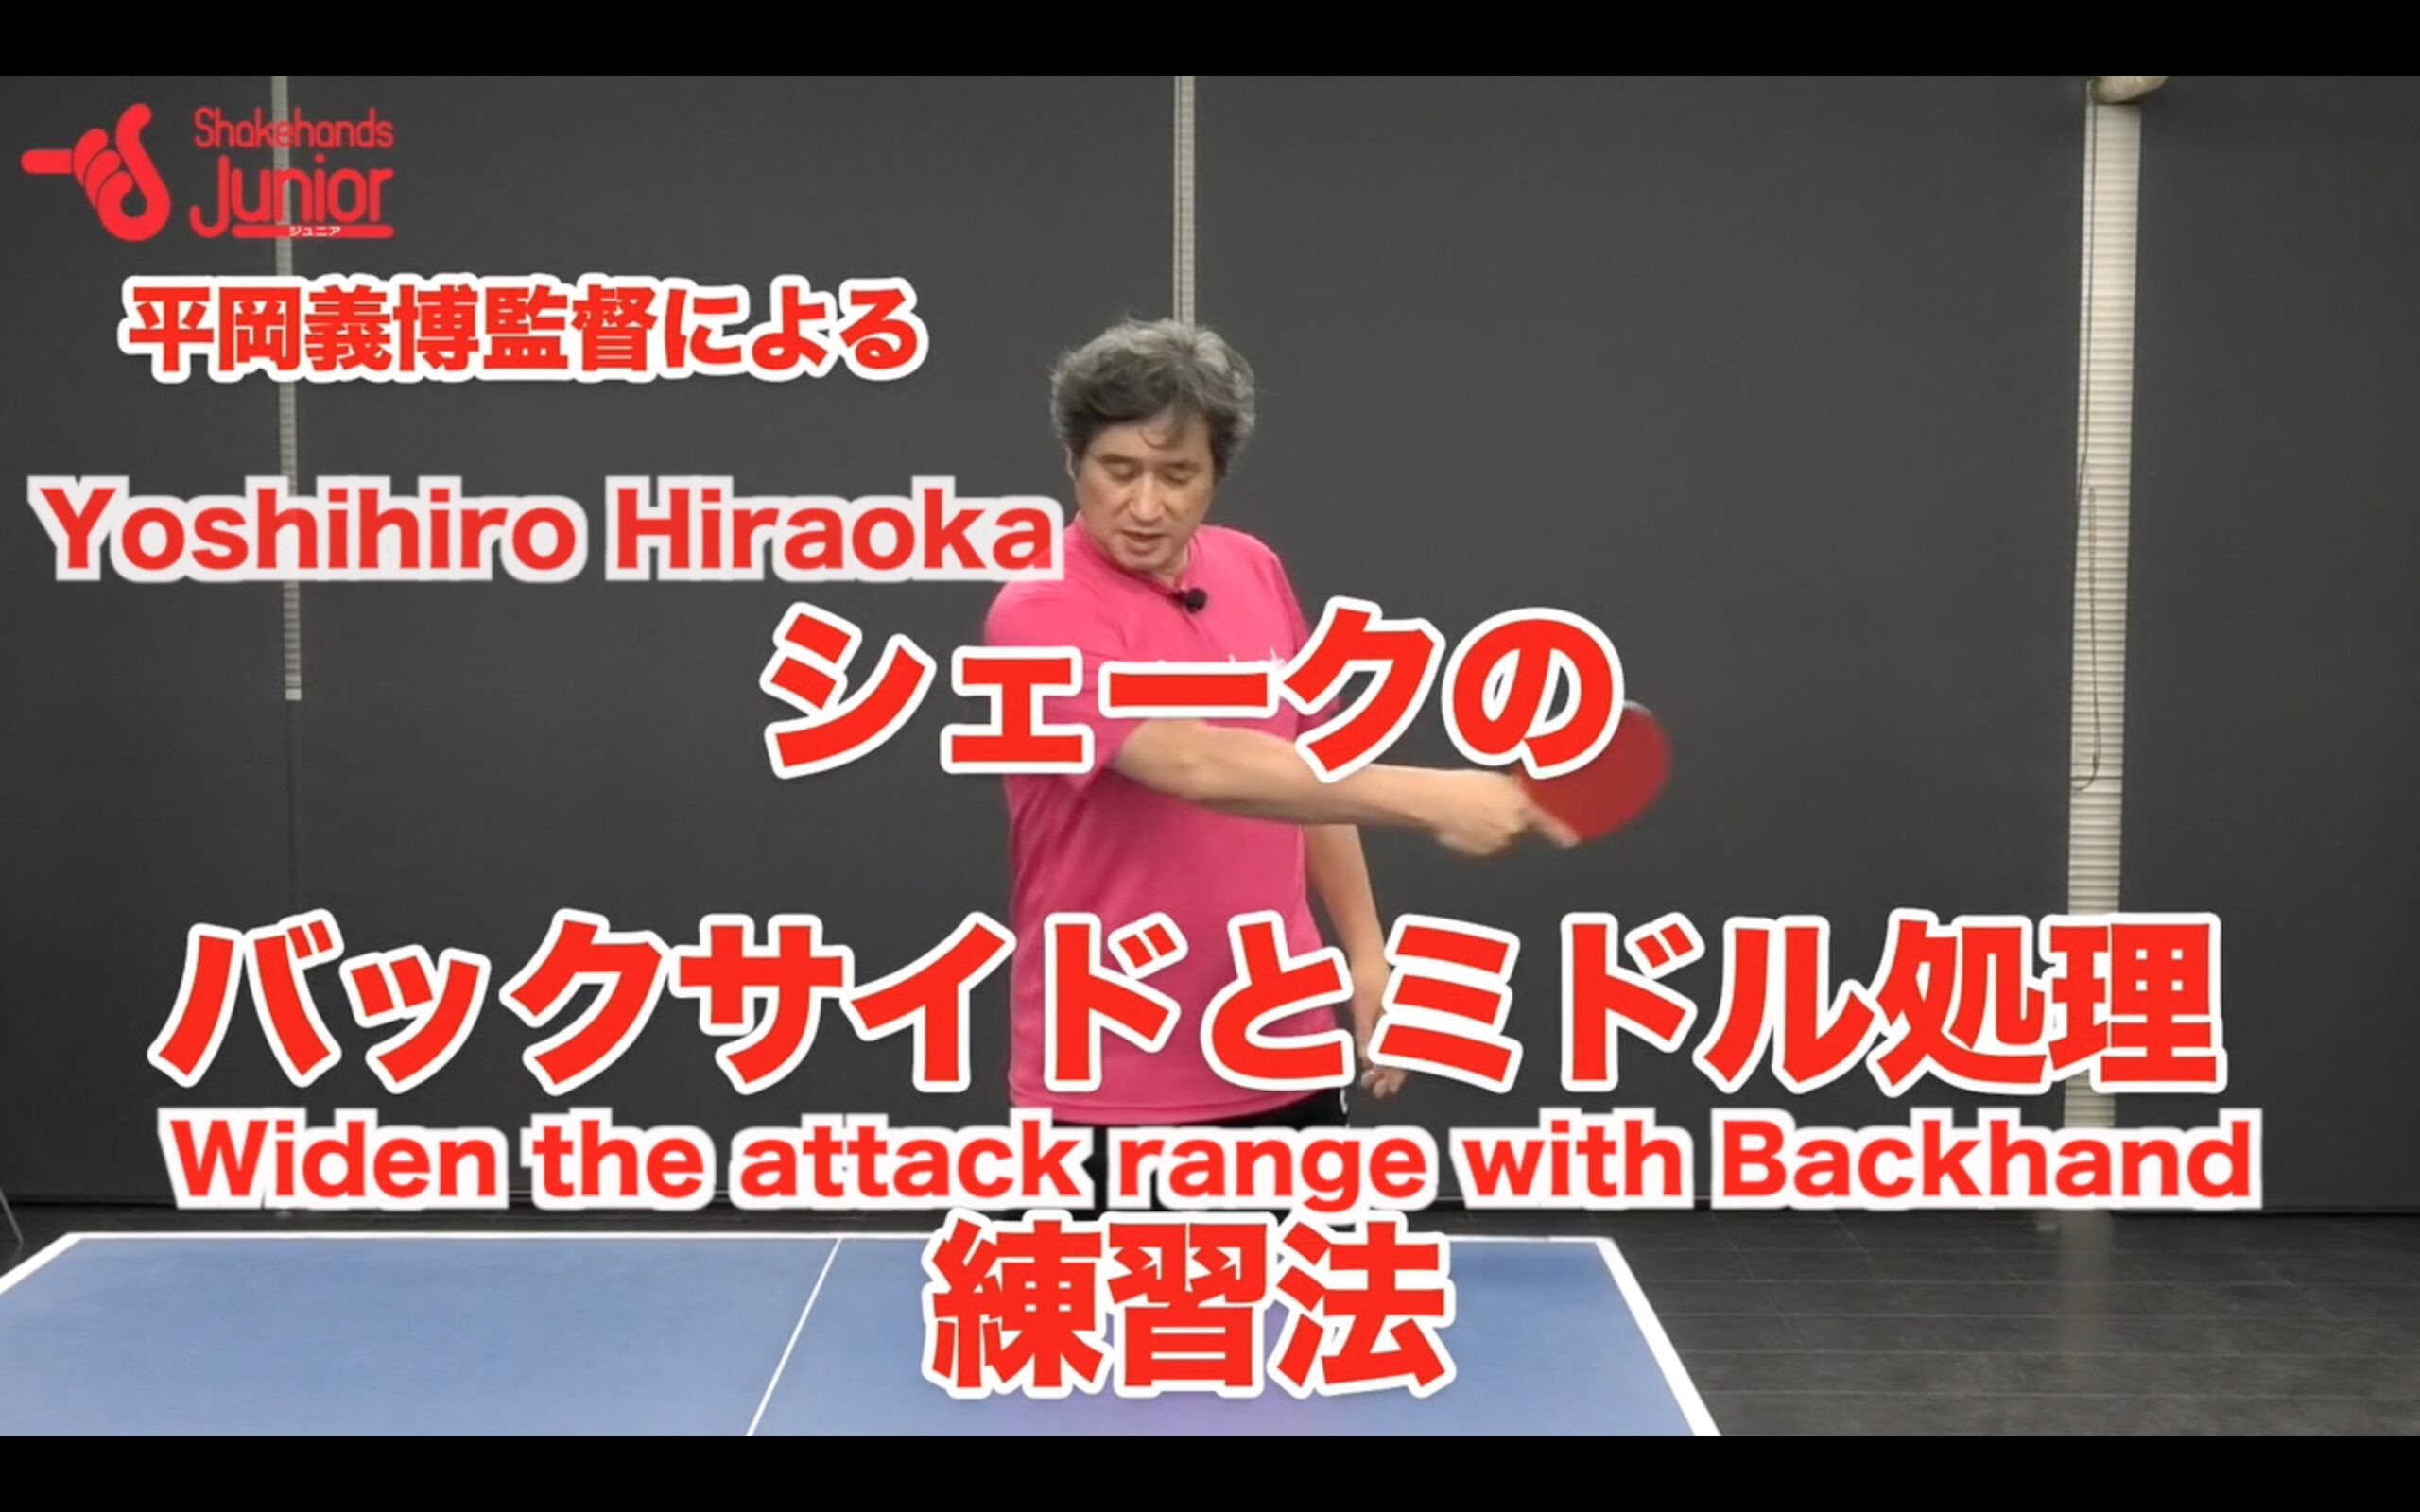 Widen the attack range with Backhand